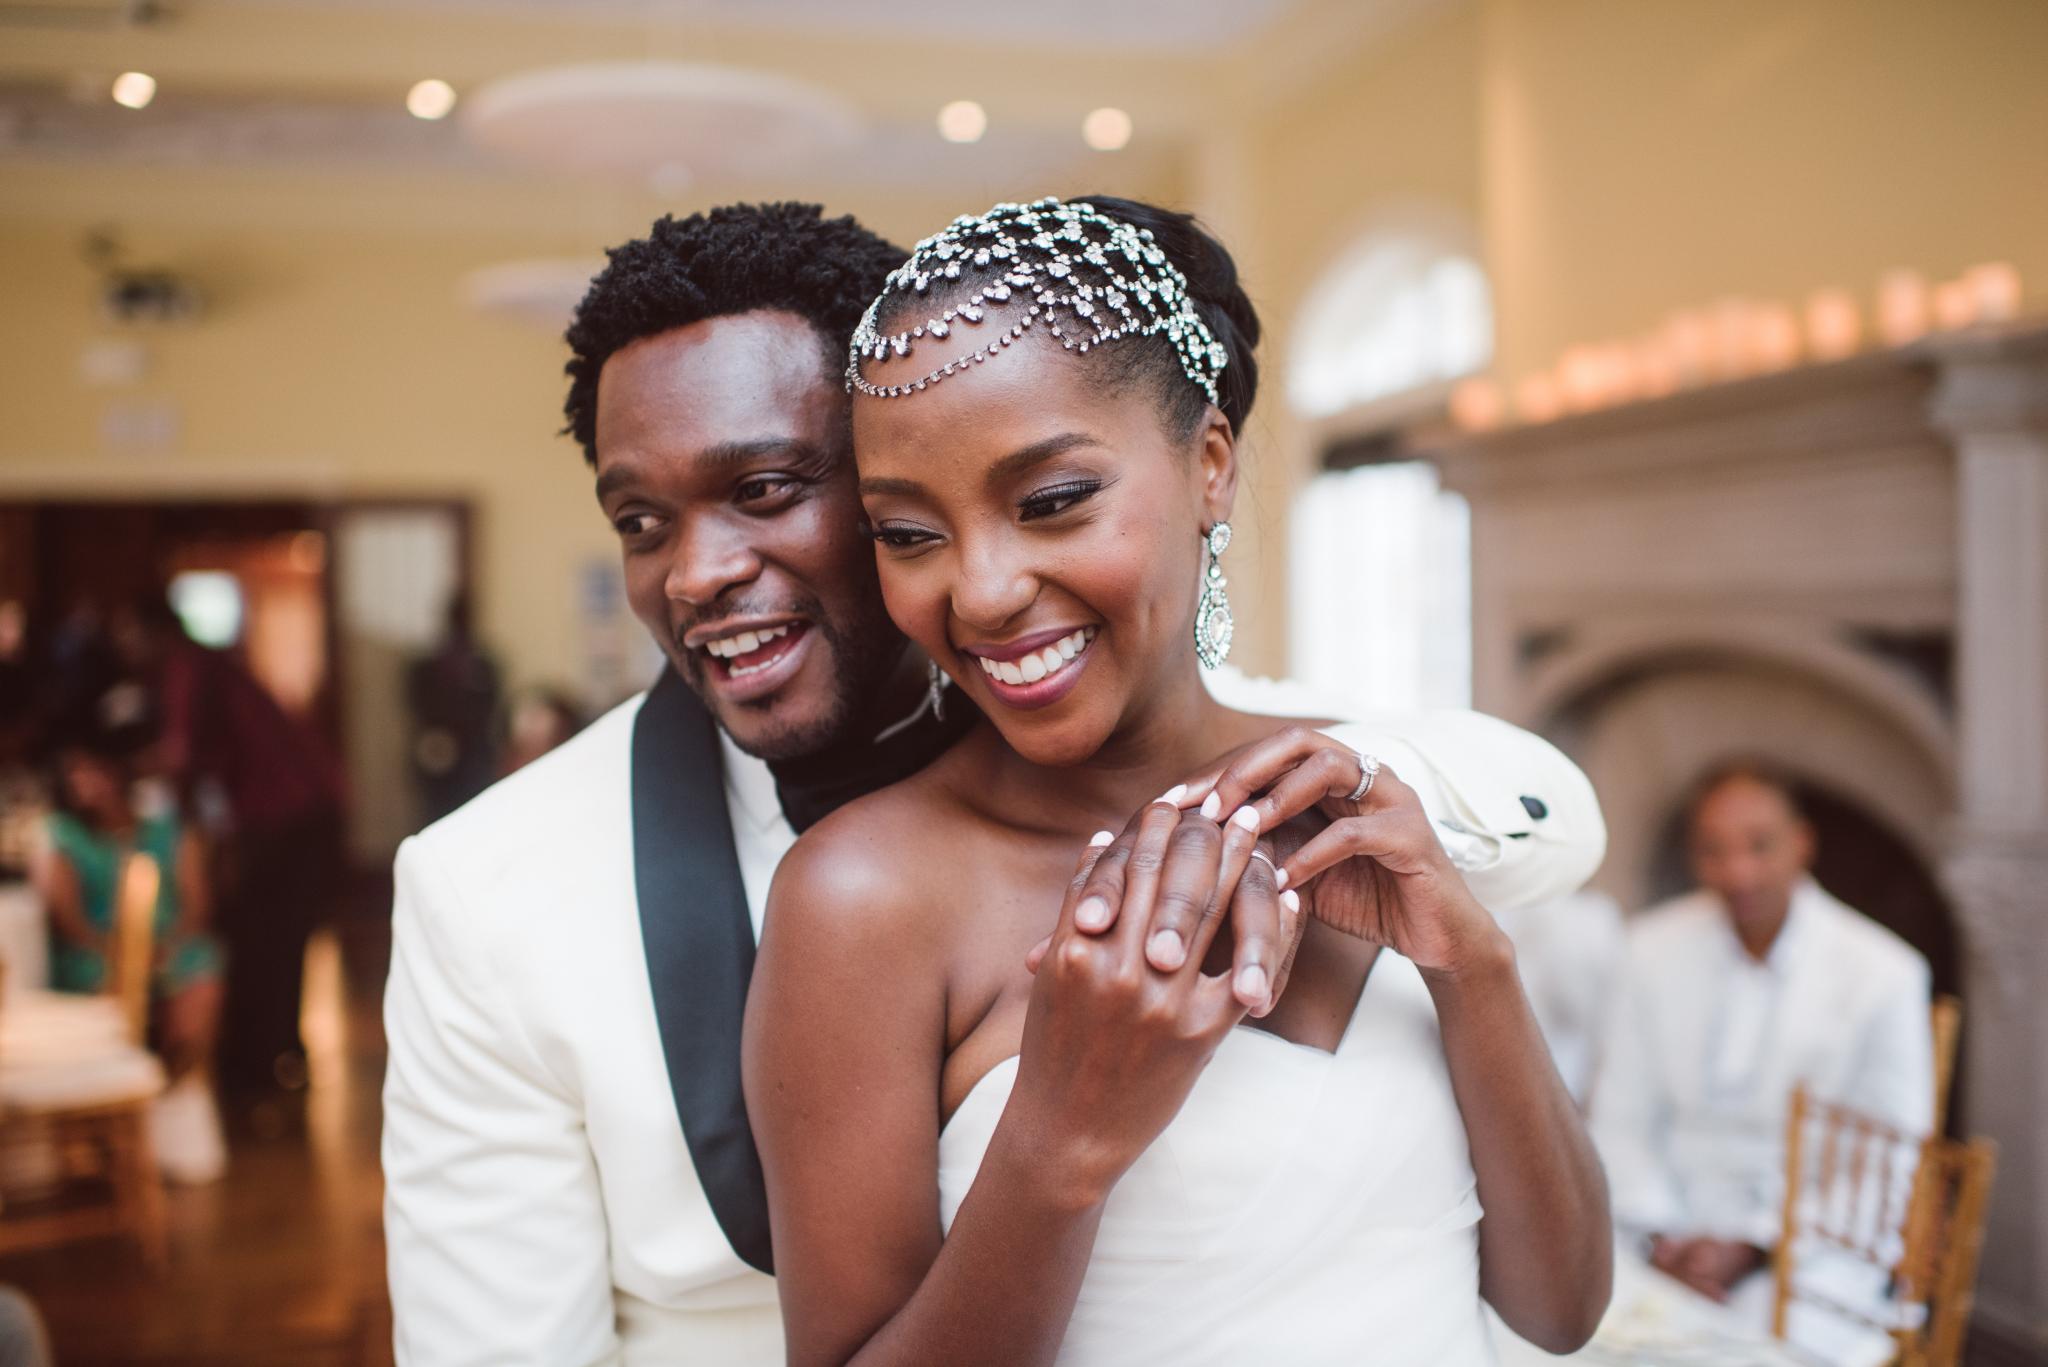 Bridal Bliss Awards: These Weddings Packed the Most Wow This Year!